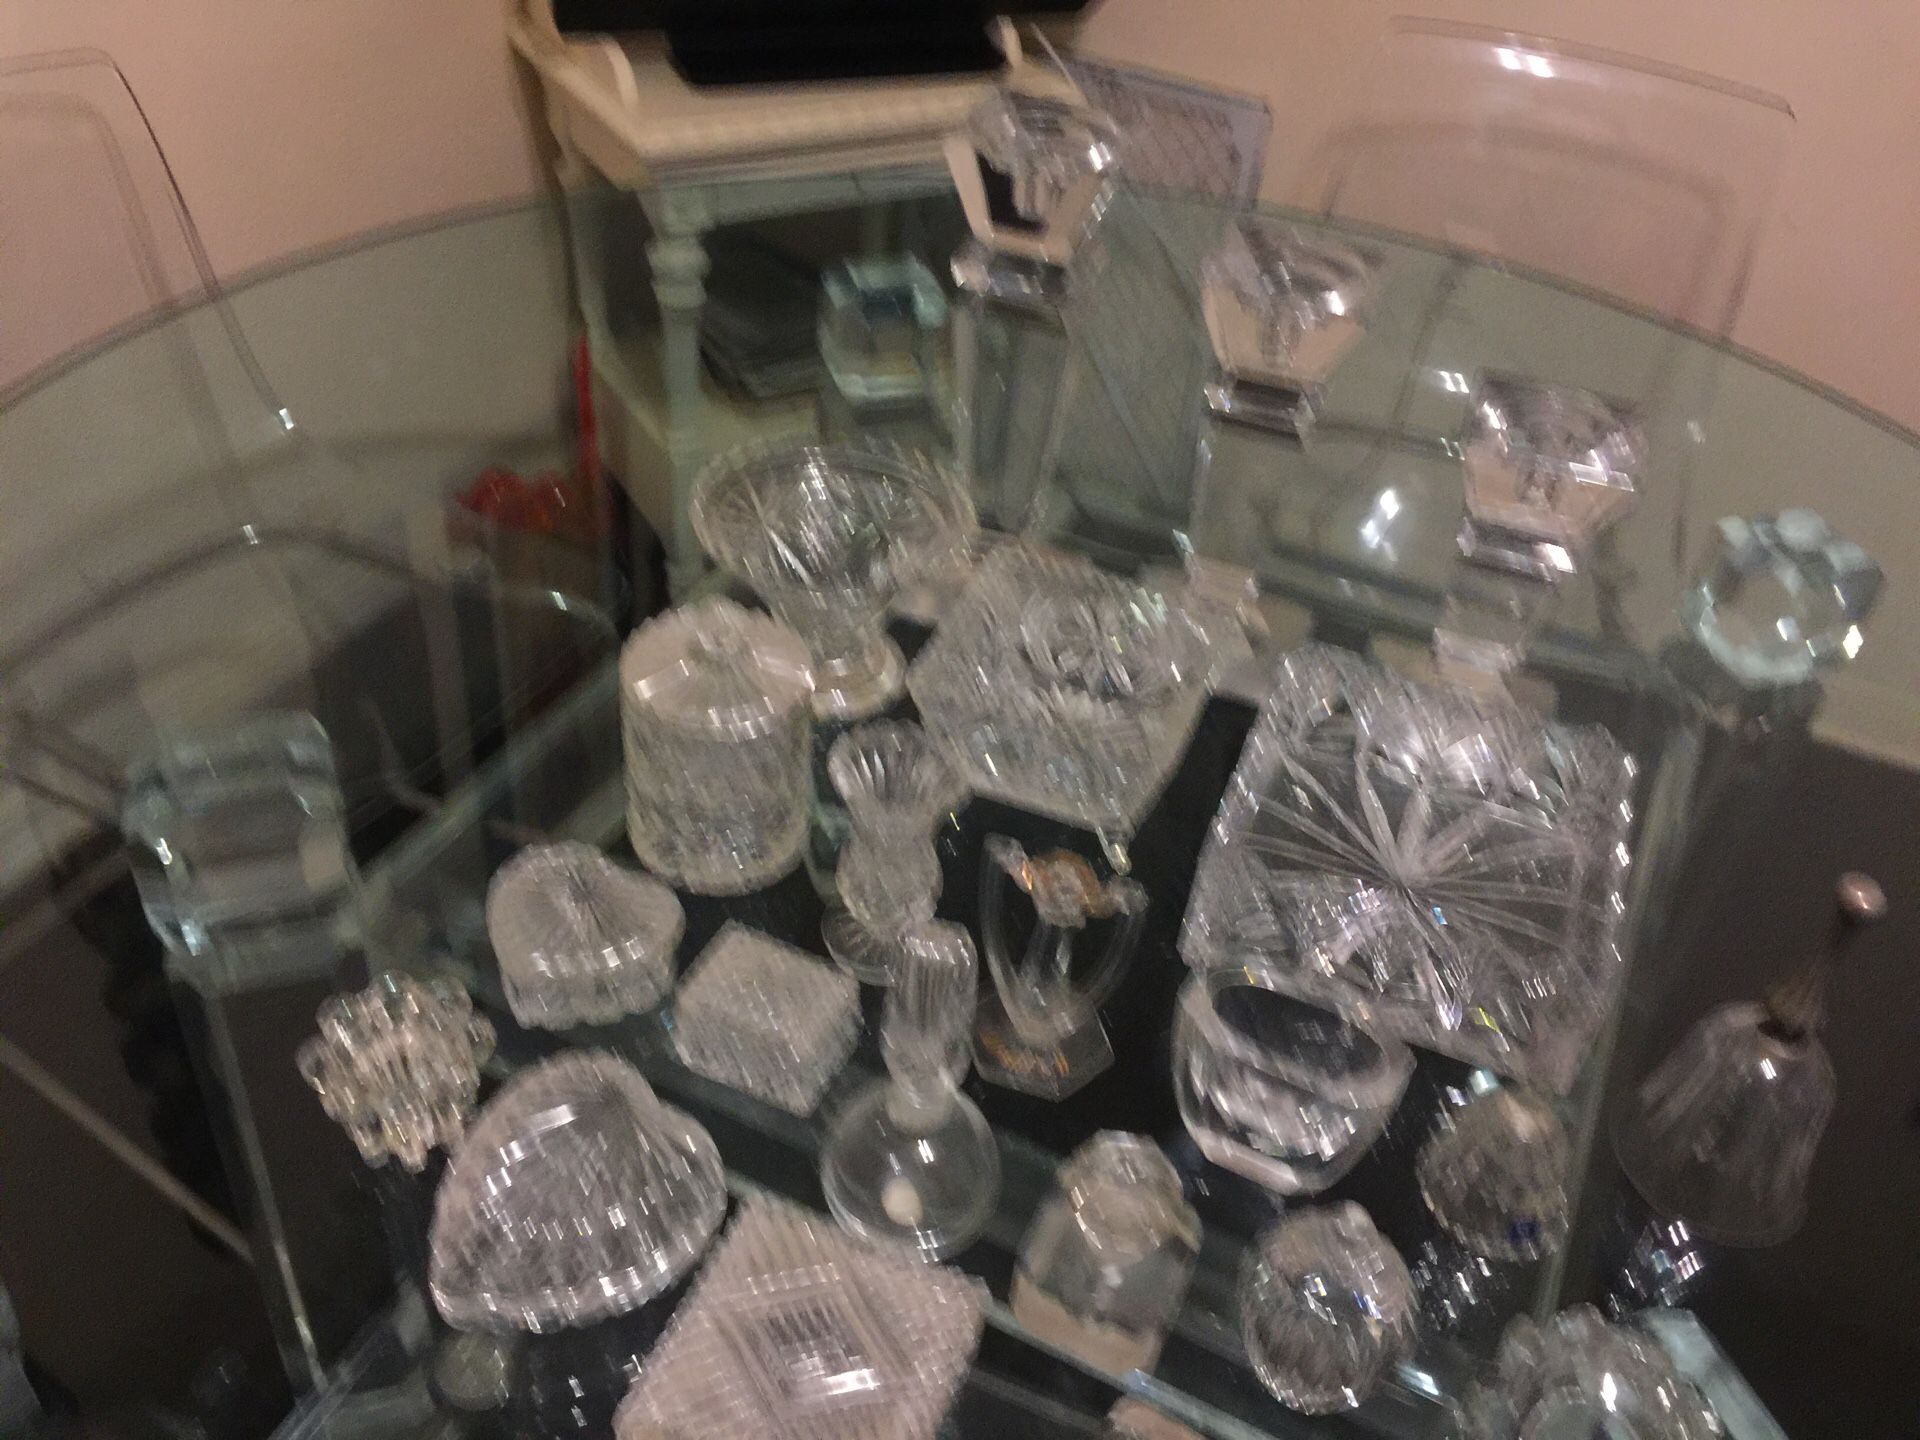 Crystal and glass collectibles